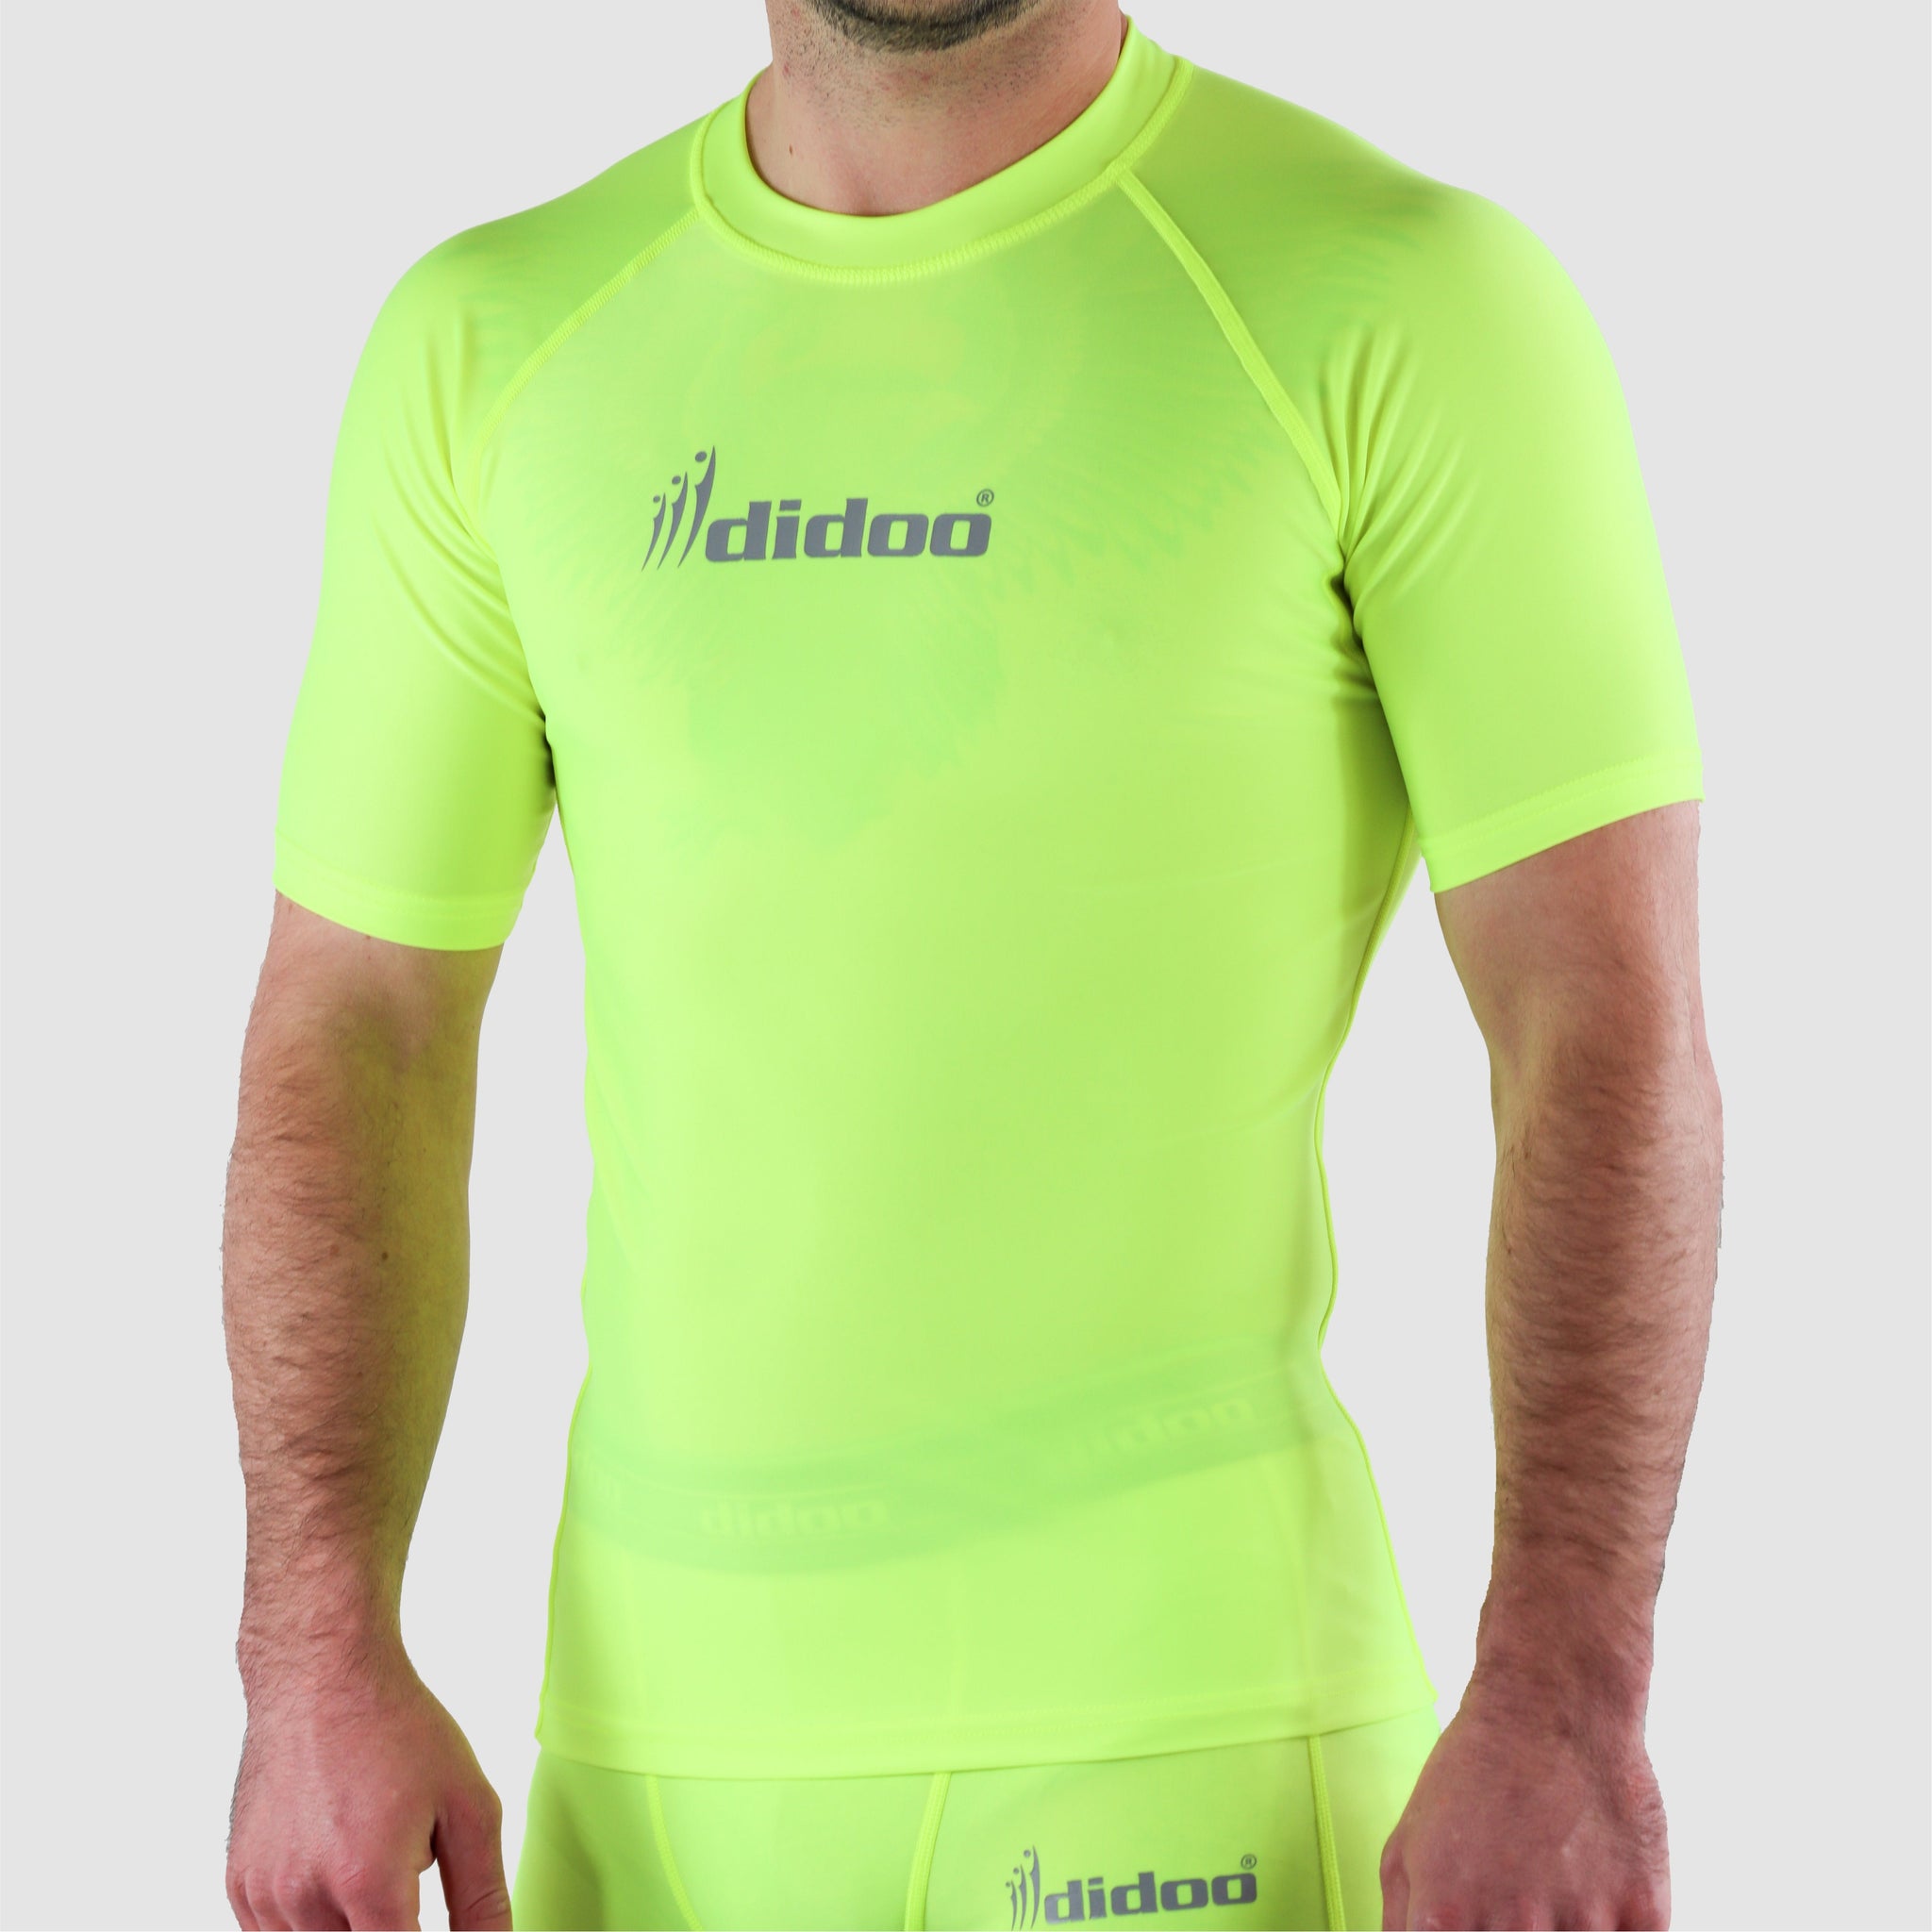 Fluorescent Yellow DiDOO Men's Compression Base Layer Short Sleeve Tops